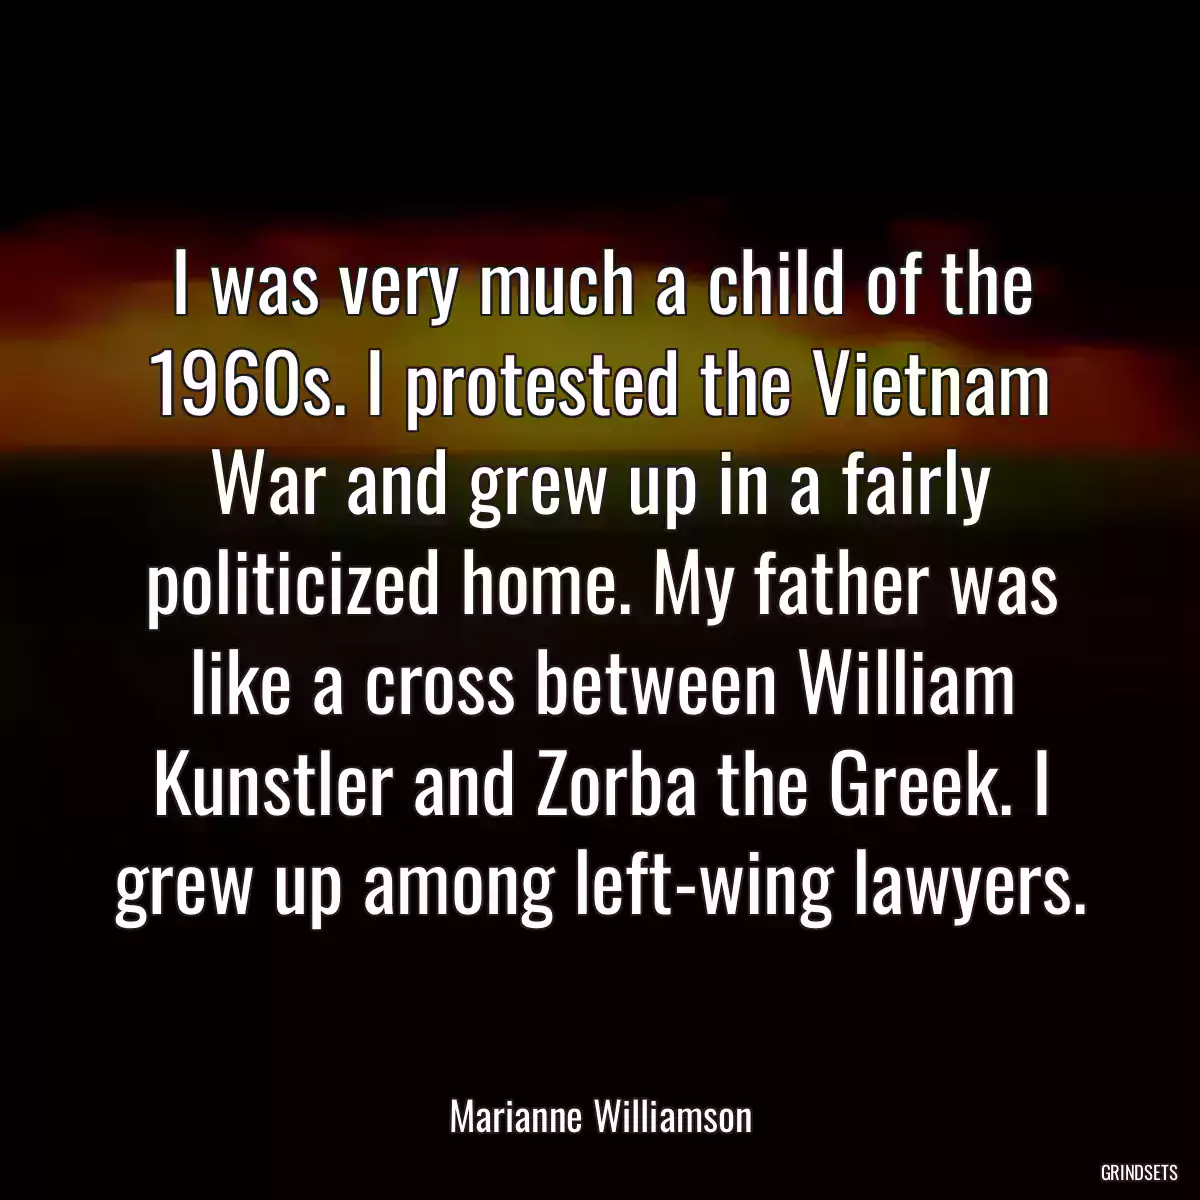 I was very much a child of the 1960s. I protested the Vietnam War and grew up in a fairly politicized home. My father was like a cross between William Kunstler and Zorba the Greek. I grew up among left-wing lawyers.